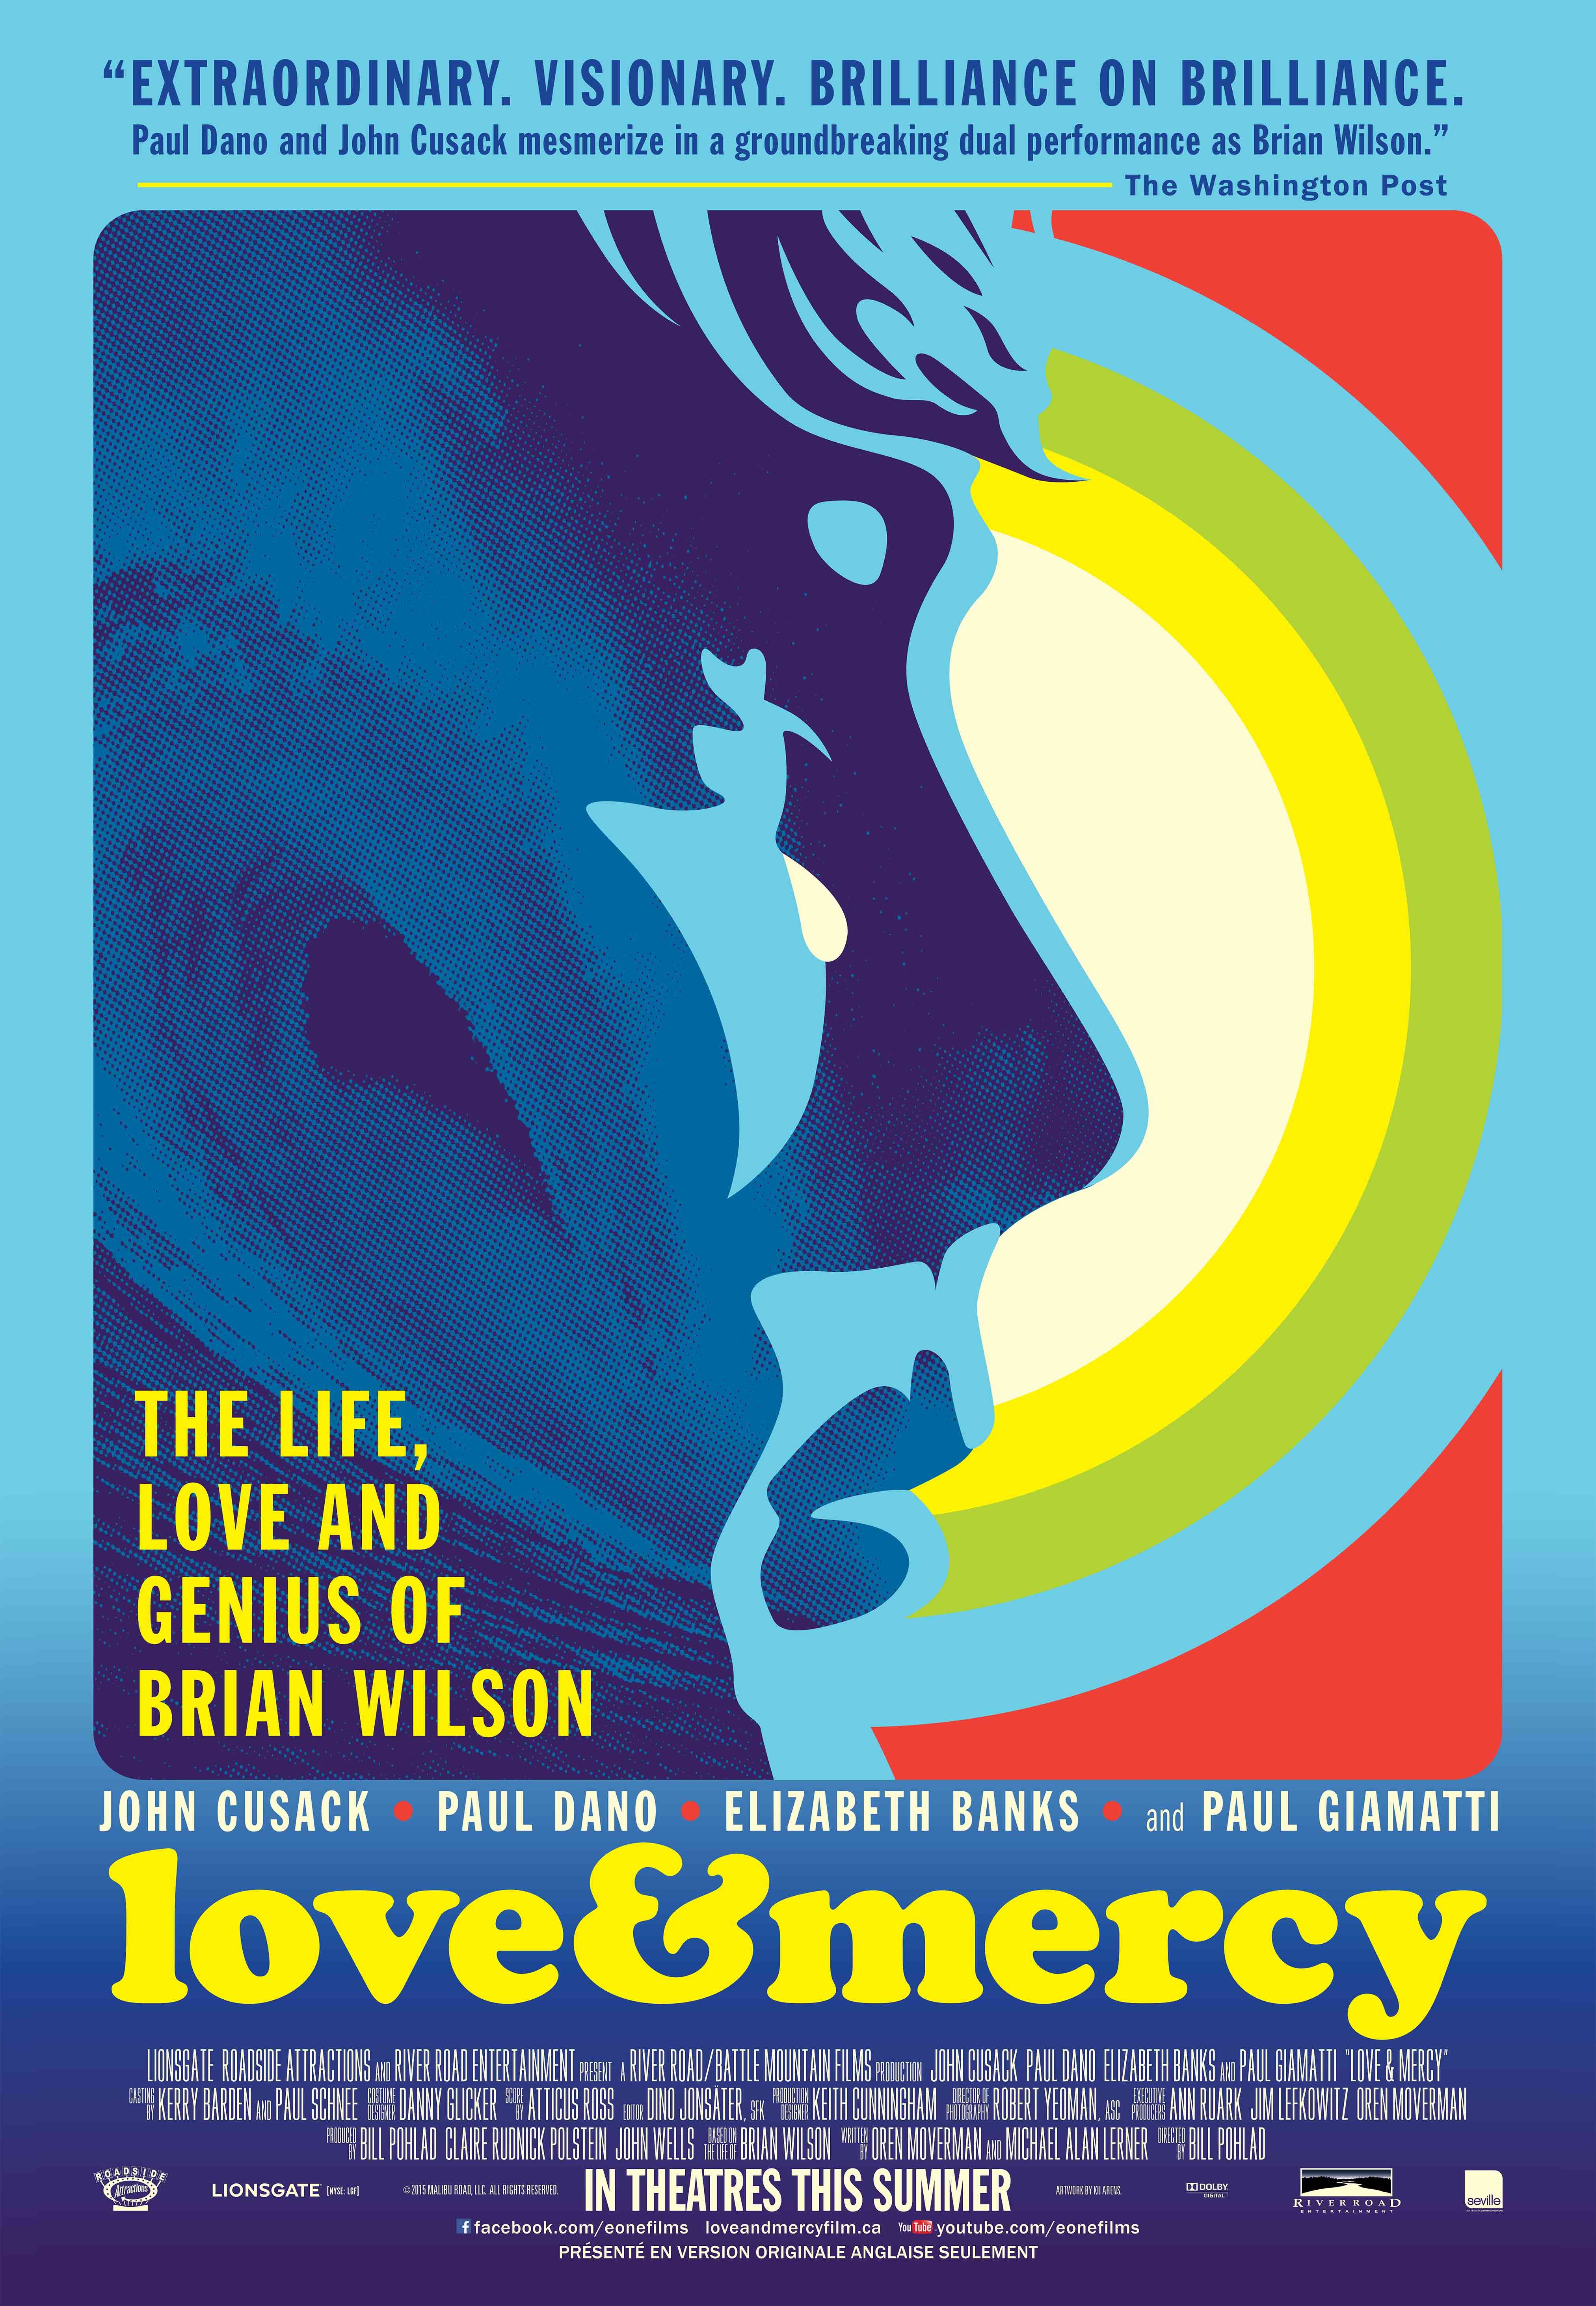 Poster of the movie Love & Mercy